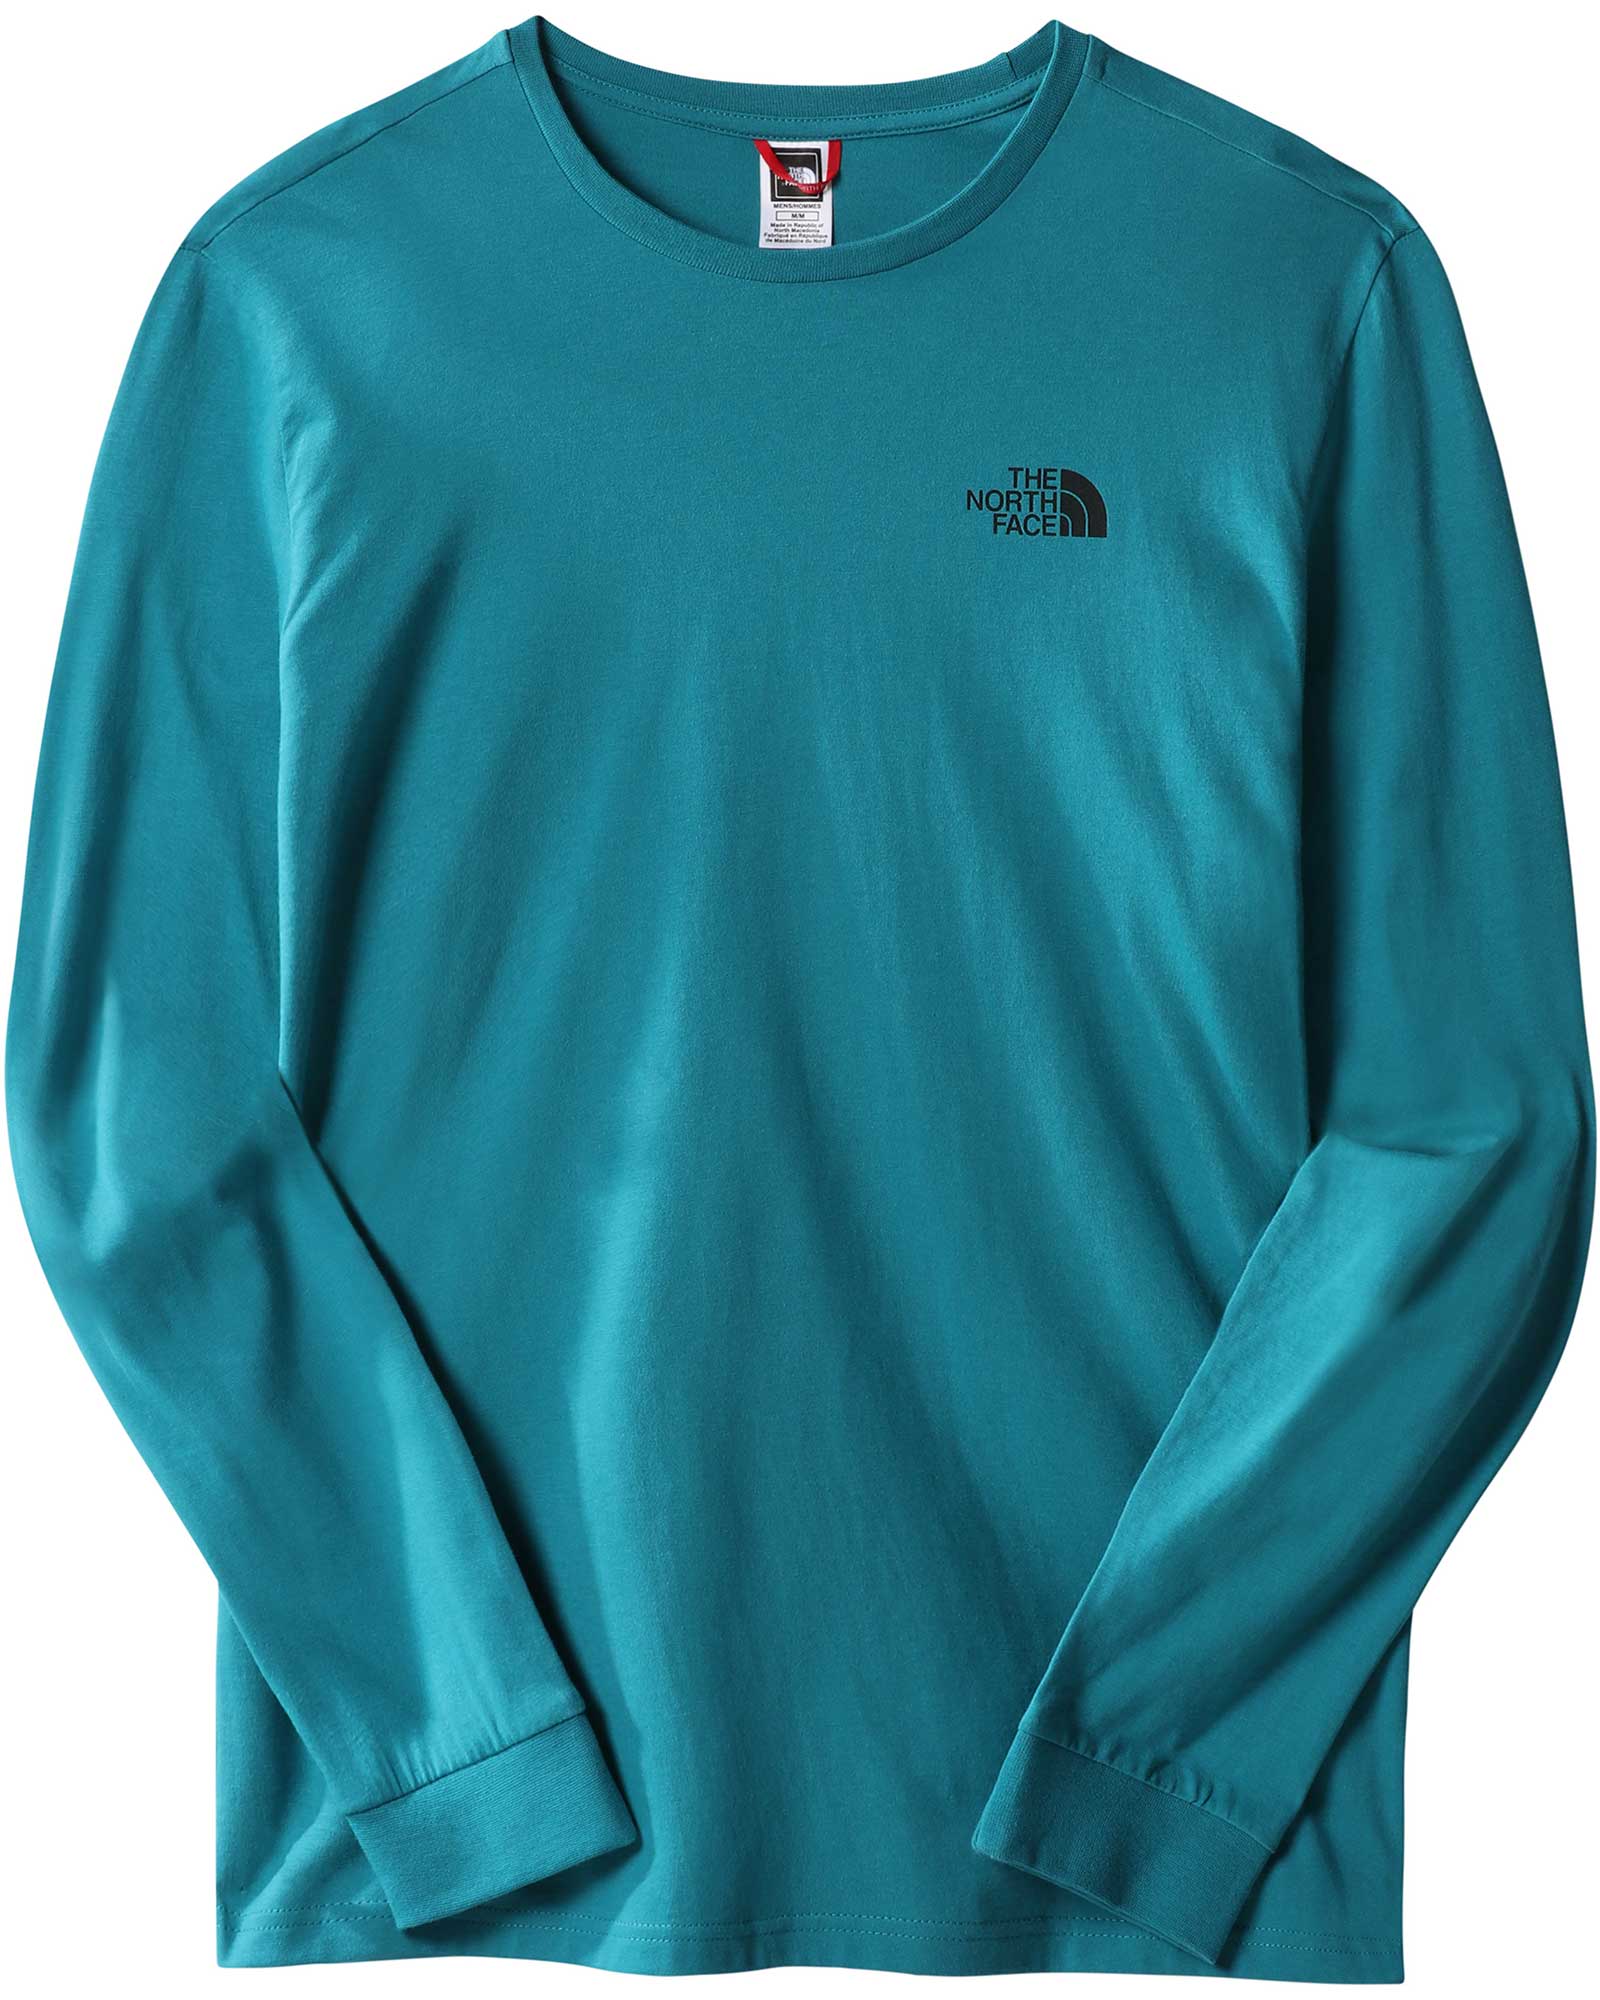 The North Face Simple Dome Men’s Long Sleeve T Shirt - Harbor Blue M